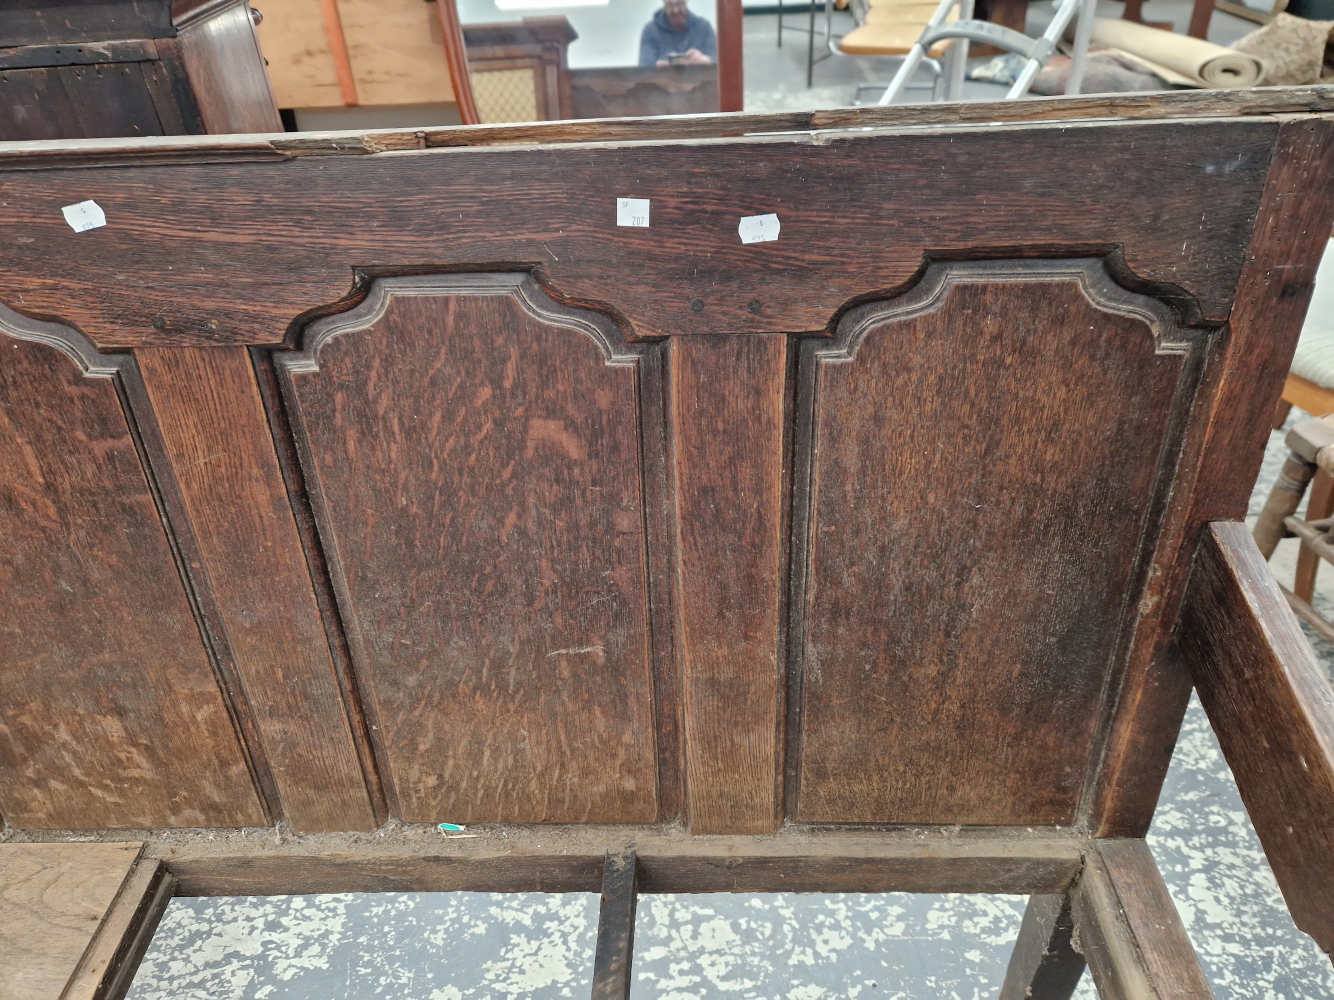 AN 18th C. OAK SETTLE WITH A FIVE PANEL BACK FLANKED BY ARMS ABOVE CABRIOLE FRONT LEGS ON PAD FEET - Image 6 of 7